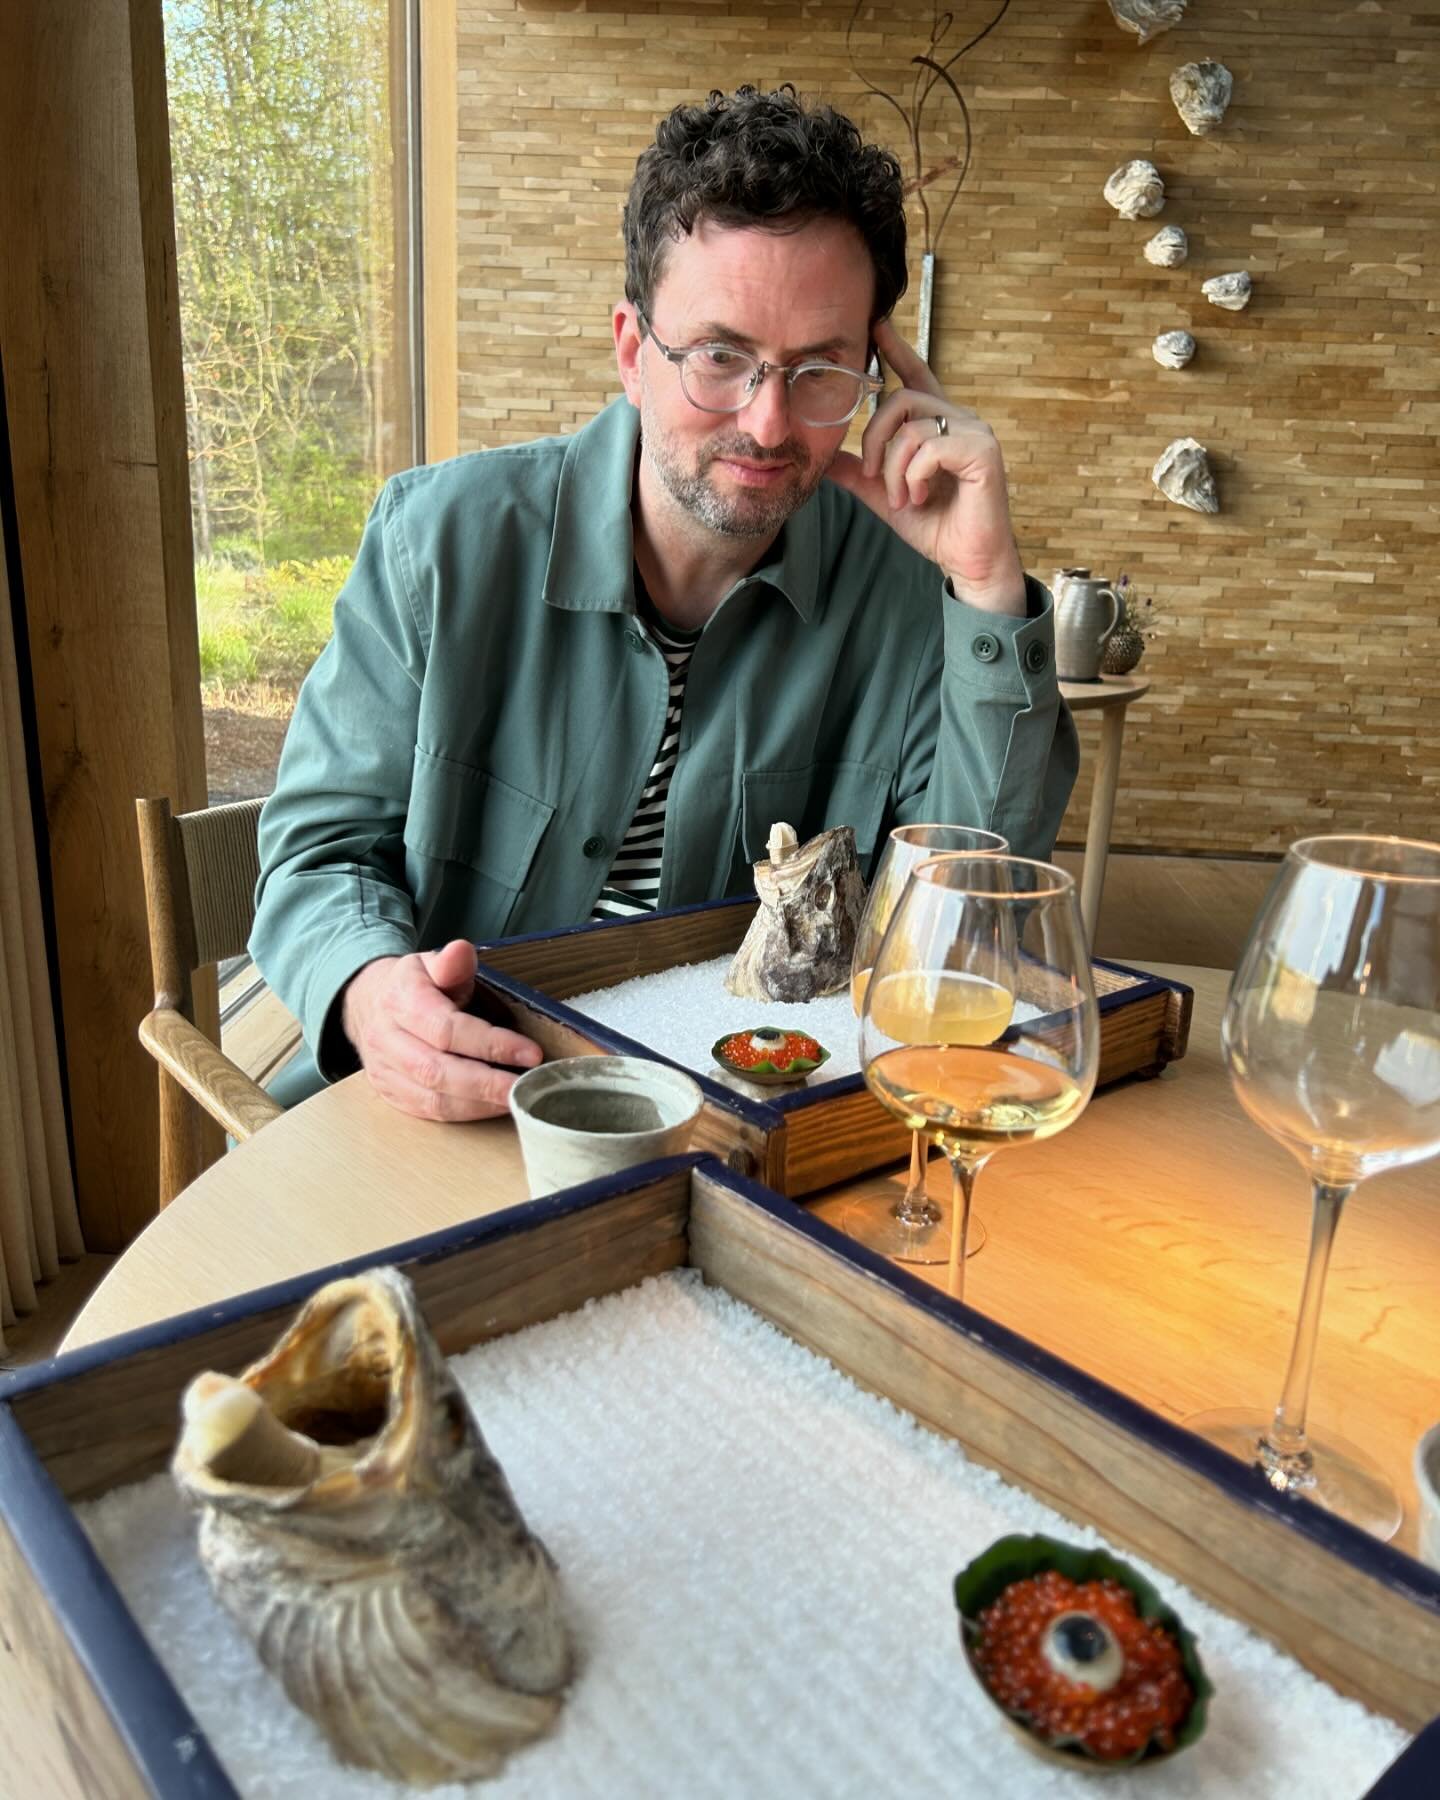 This wasn&rsquo;t the @nomacph story I thought I was going to tell. I spent the week leading up to this dinner reading @thegordinier&rsquo;s wonderful book Hungry, preparing myself for the meal of a lifetime. Then yesterday morning we were both feeli